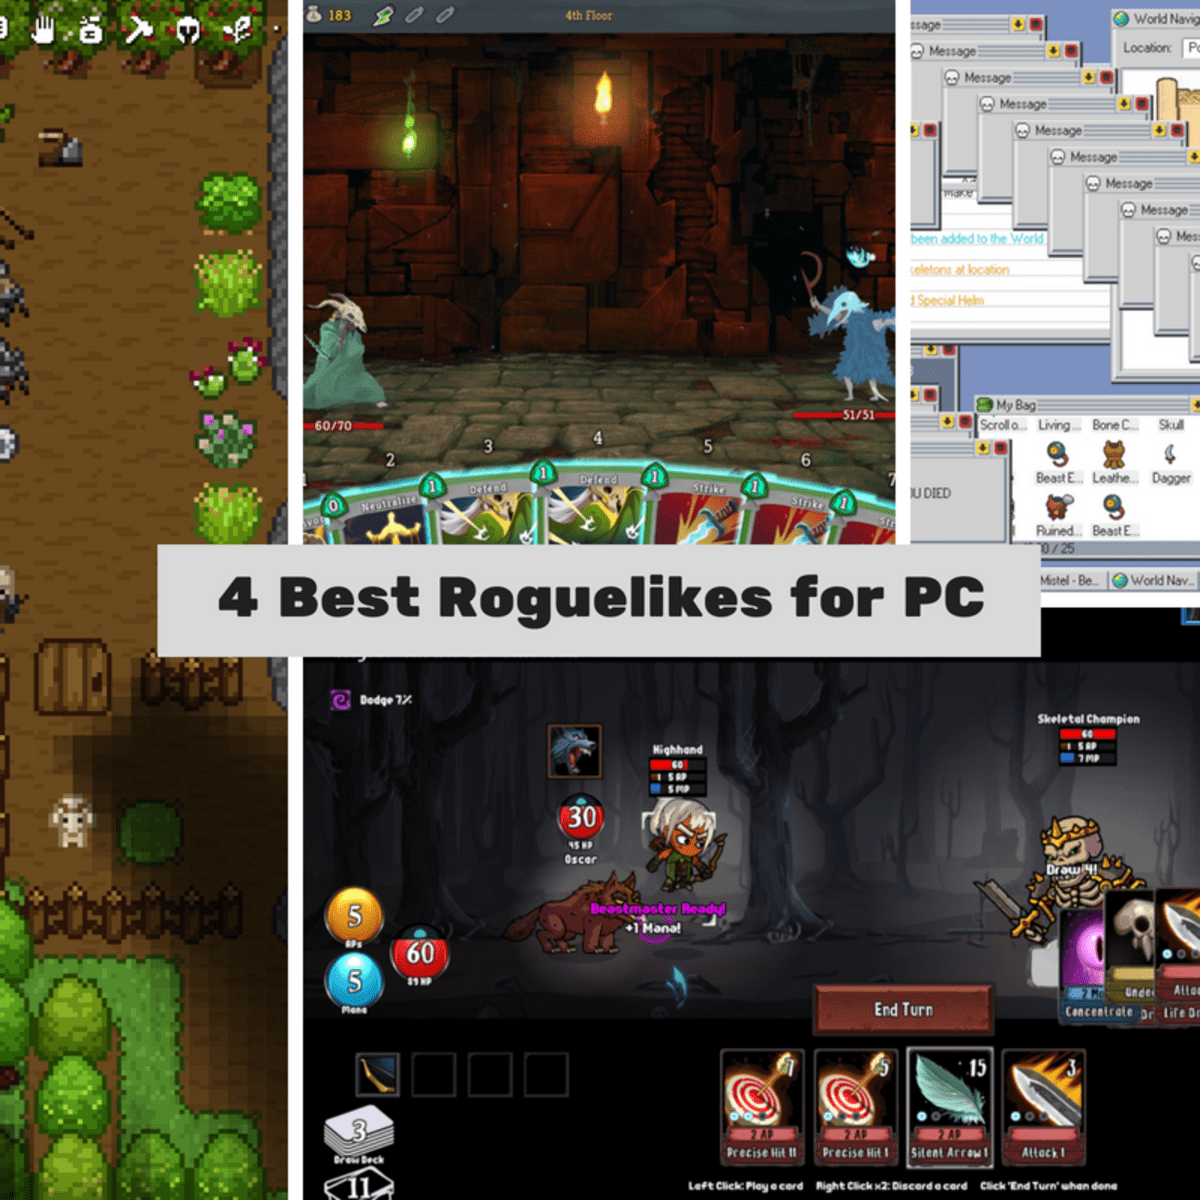 kugle Ambient sundhed 4 Best Roguelike Games for PC - LevelSkip